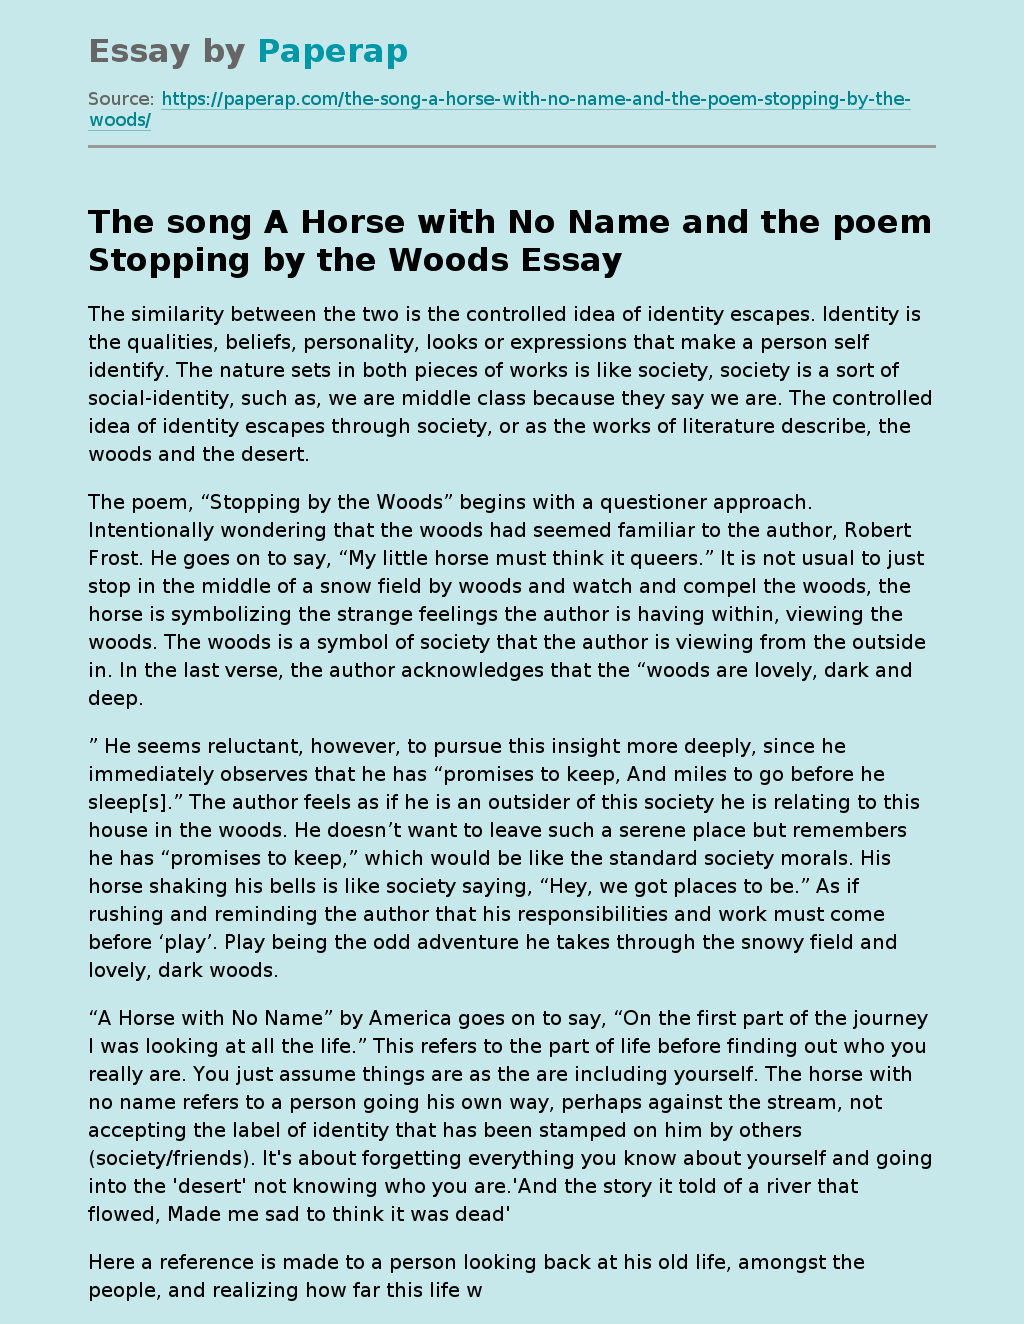 The song A Horse with No Name and the poem Stopping by the Woods